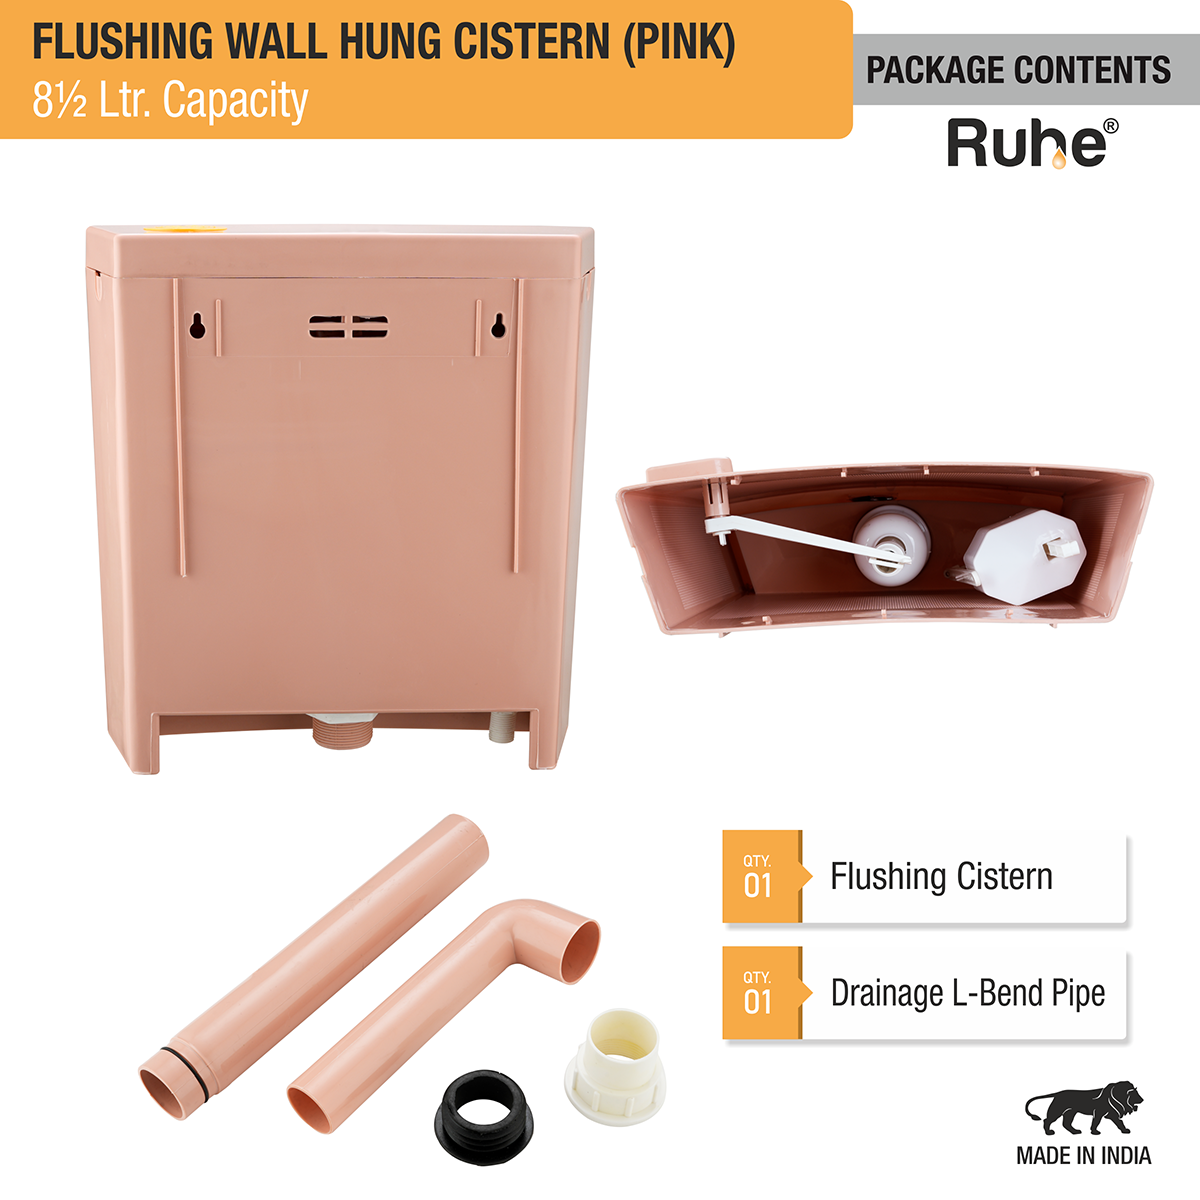 Flushing Wall Hung Cistern 8.5 Ltr. (Pink) package content